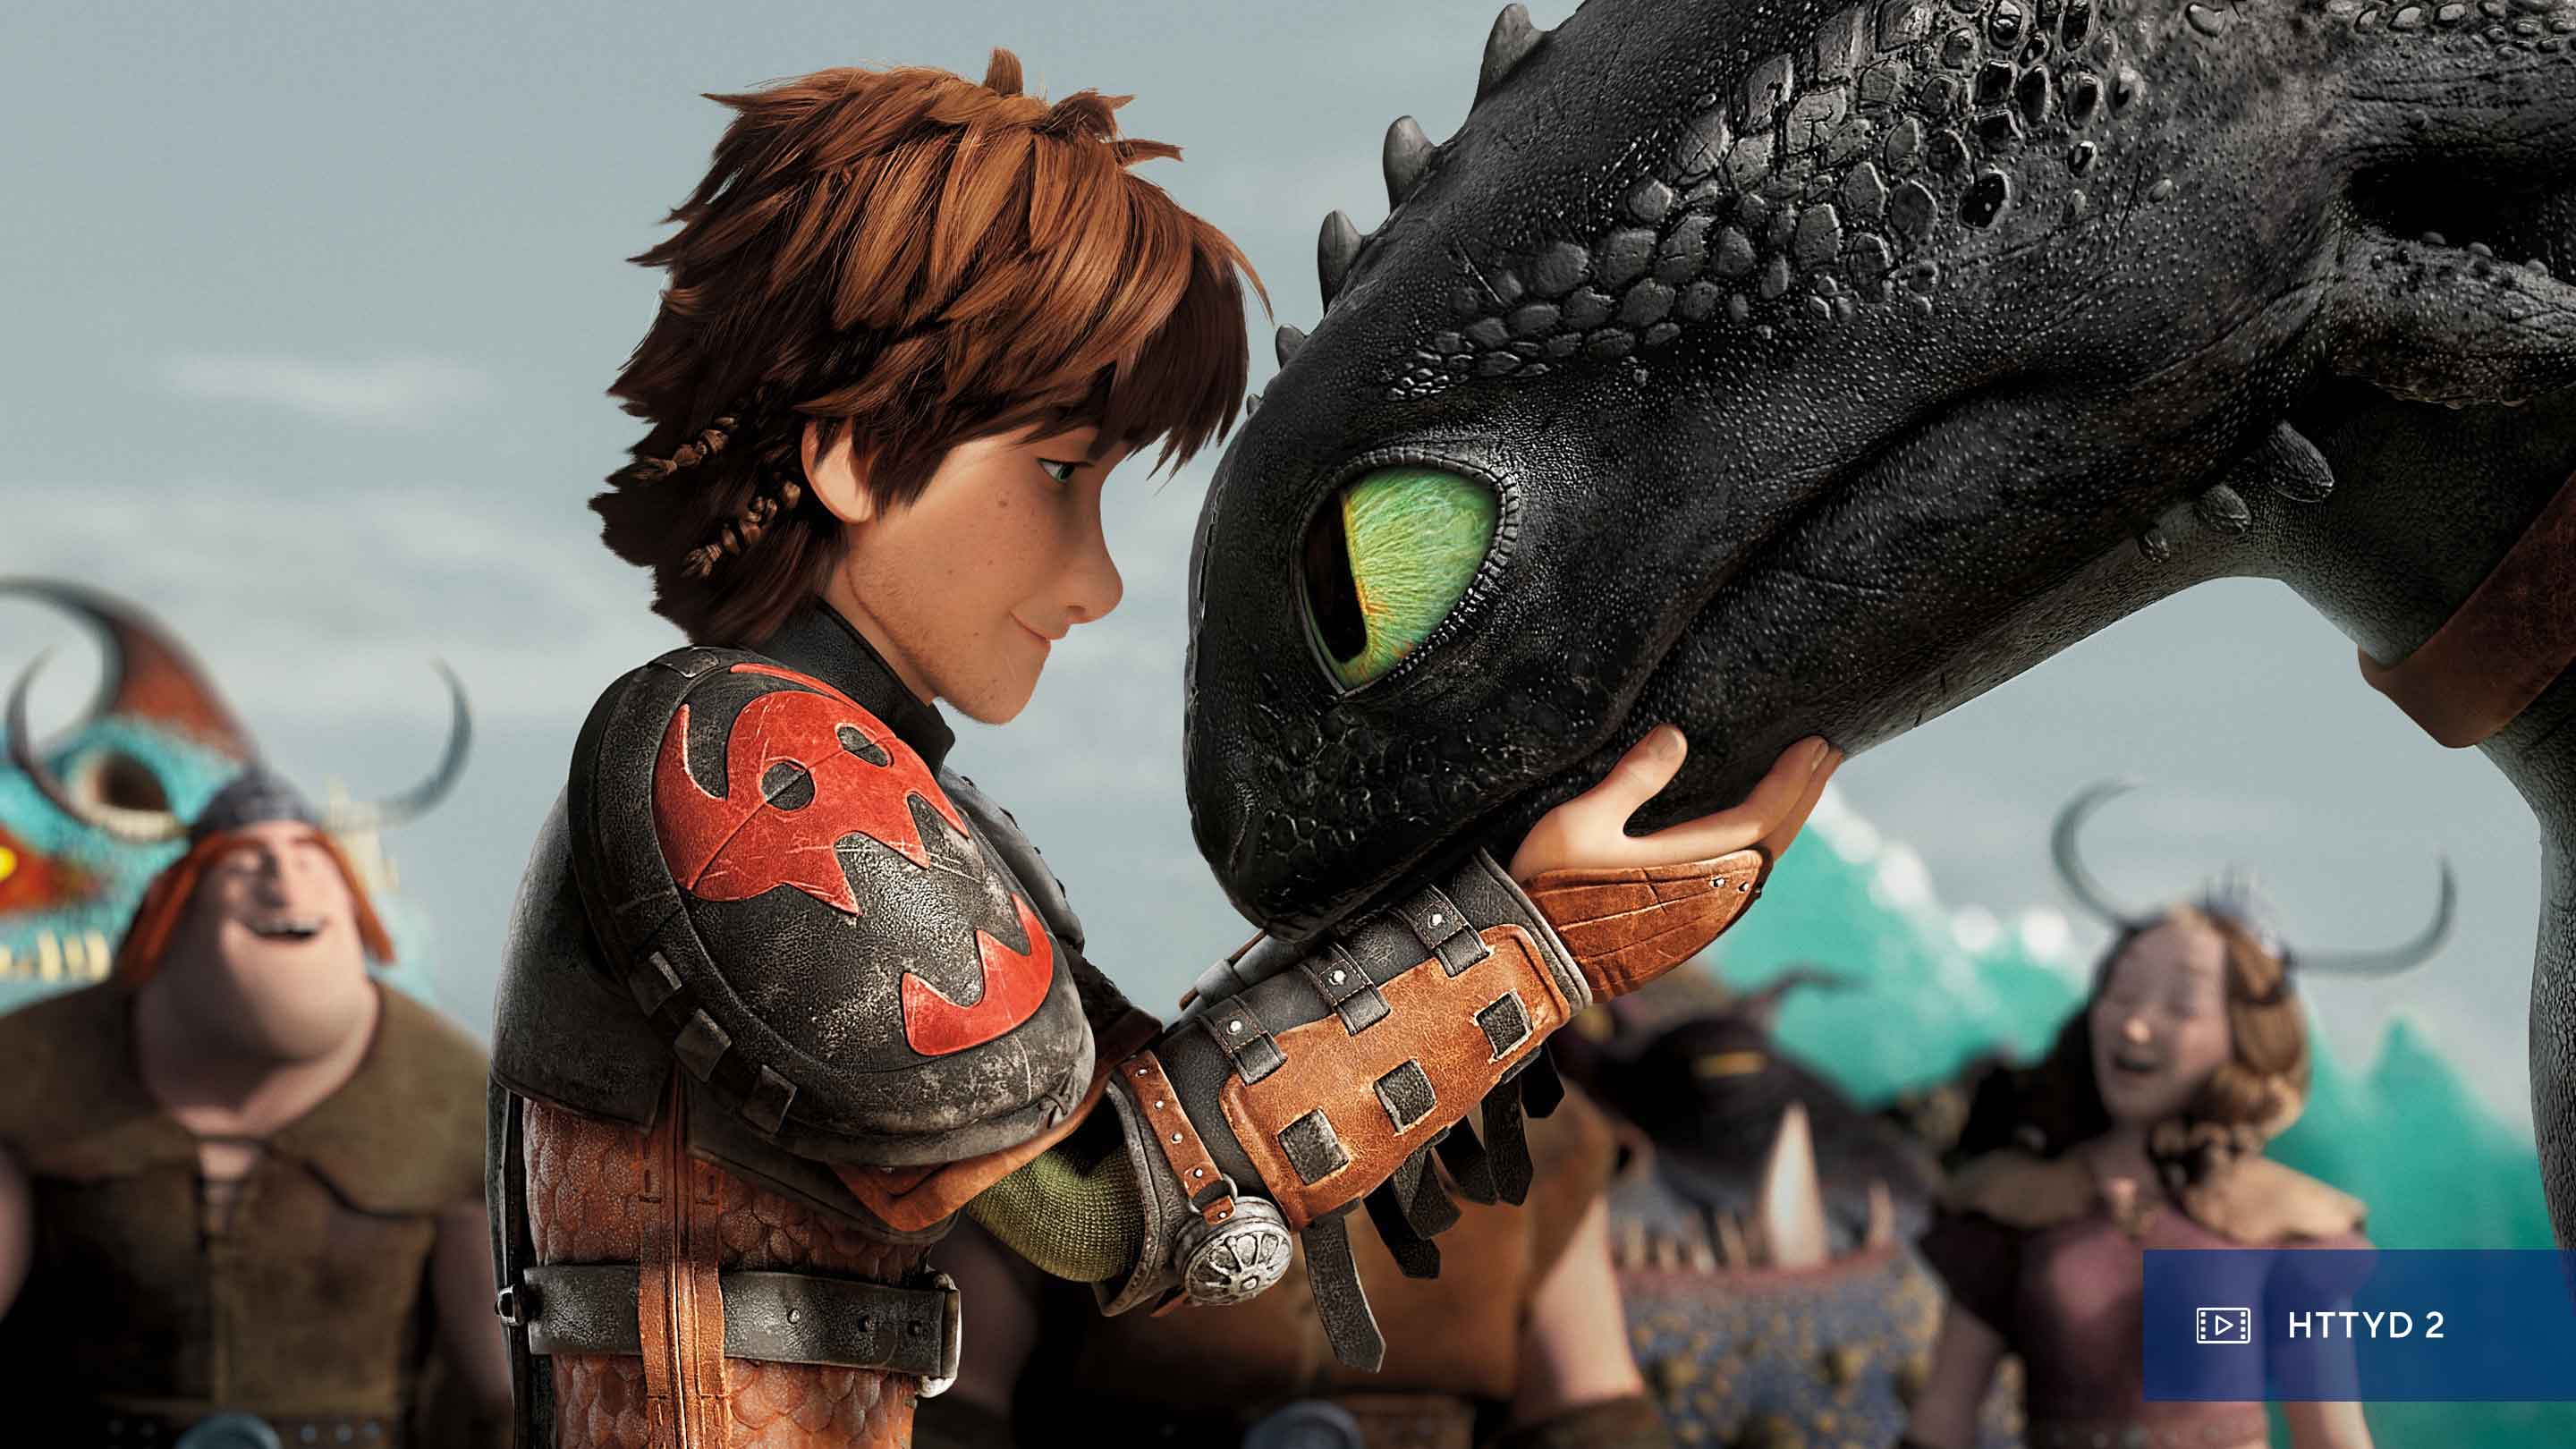 how to train your dragon 2 grump toy